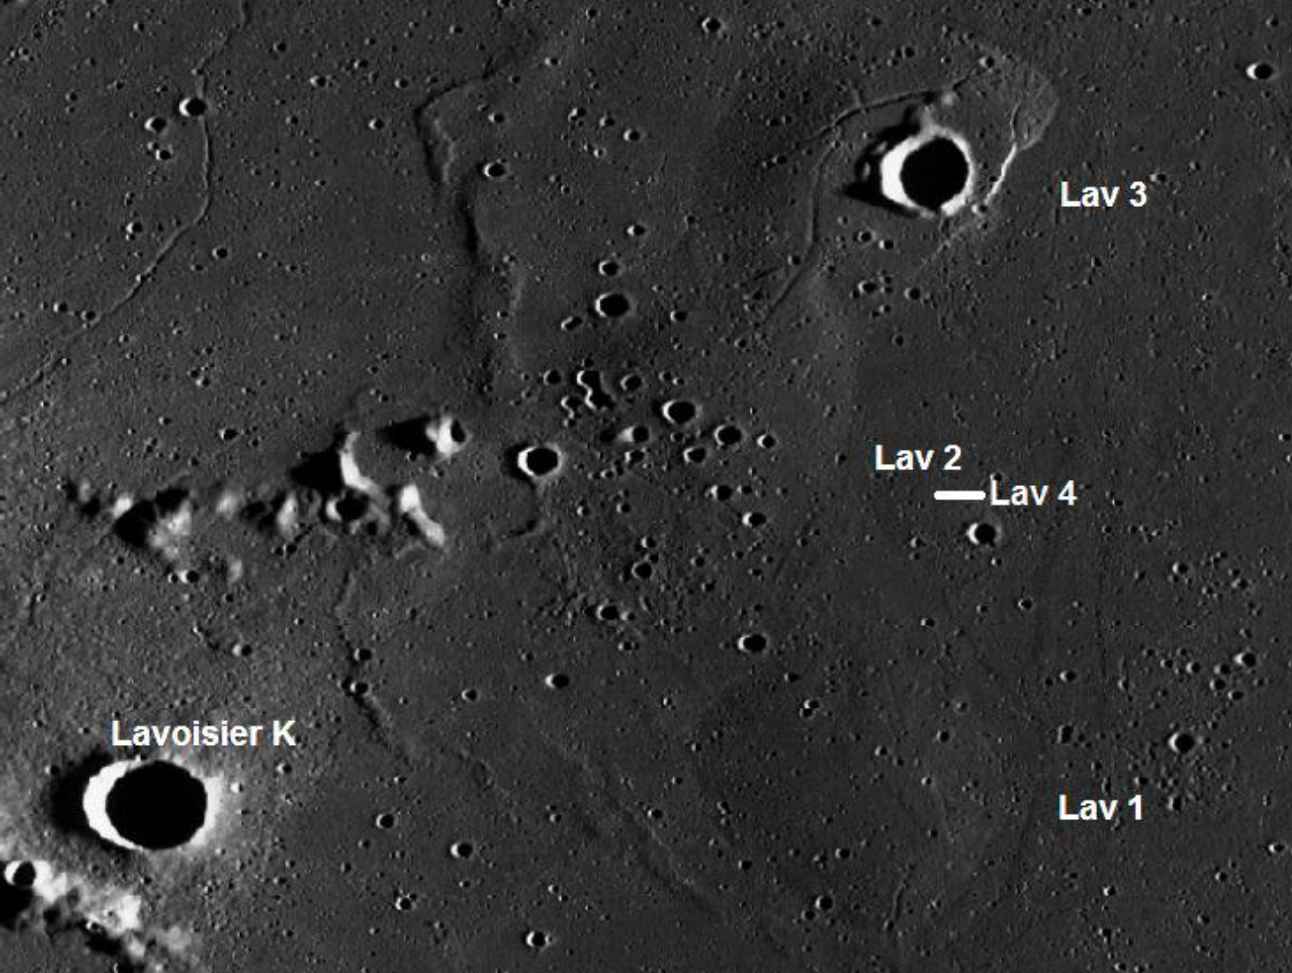 Figure 2. WAC image of the examined region. Note the dome Lavoisier 4, which is not prominent as in the telescopic image (Figure 1). The image is shown in cylindrical projection, removing the foreshortening.